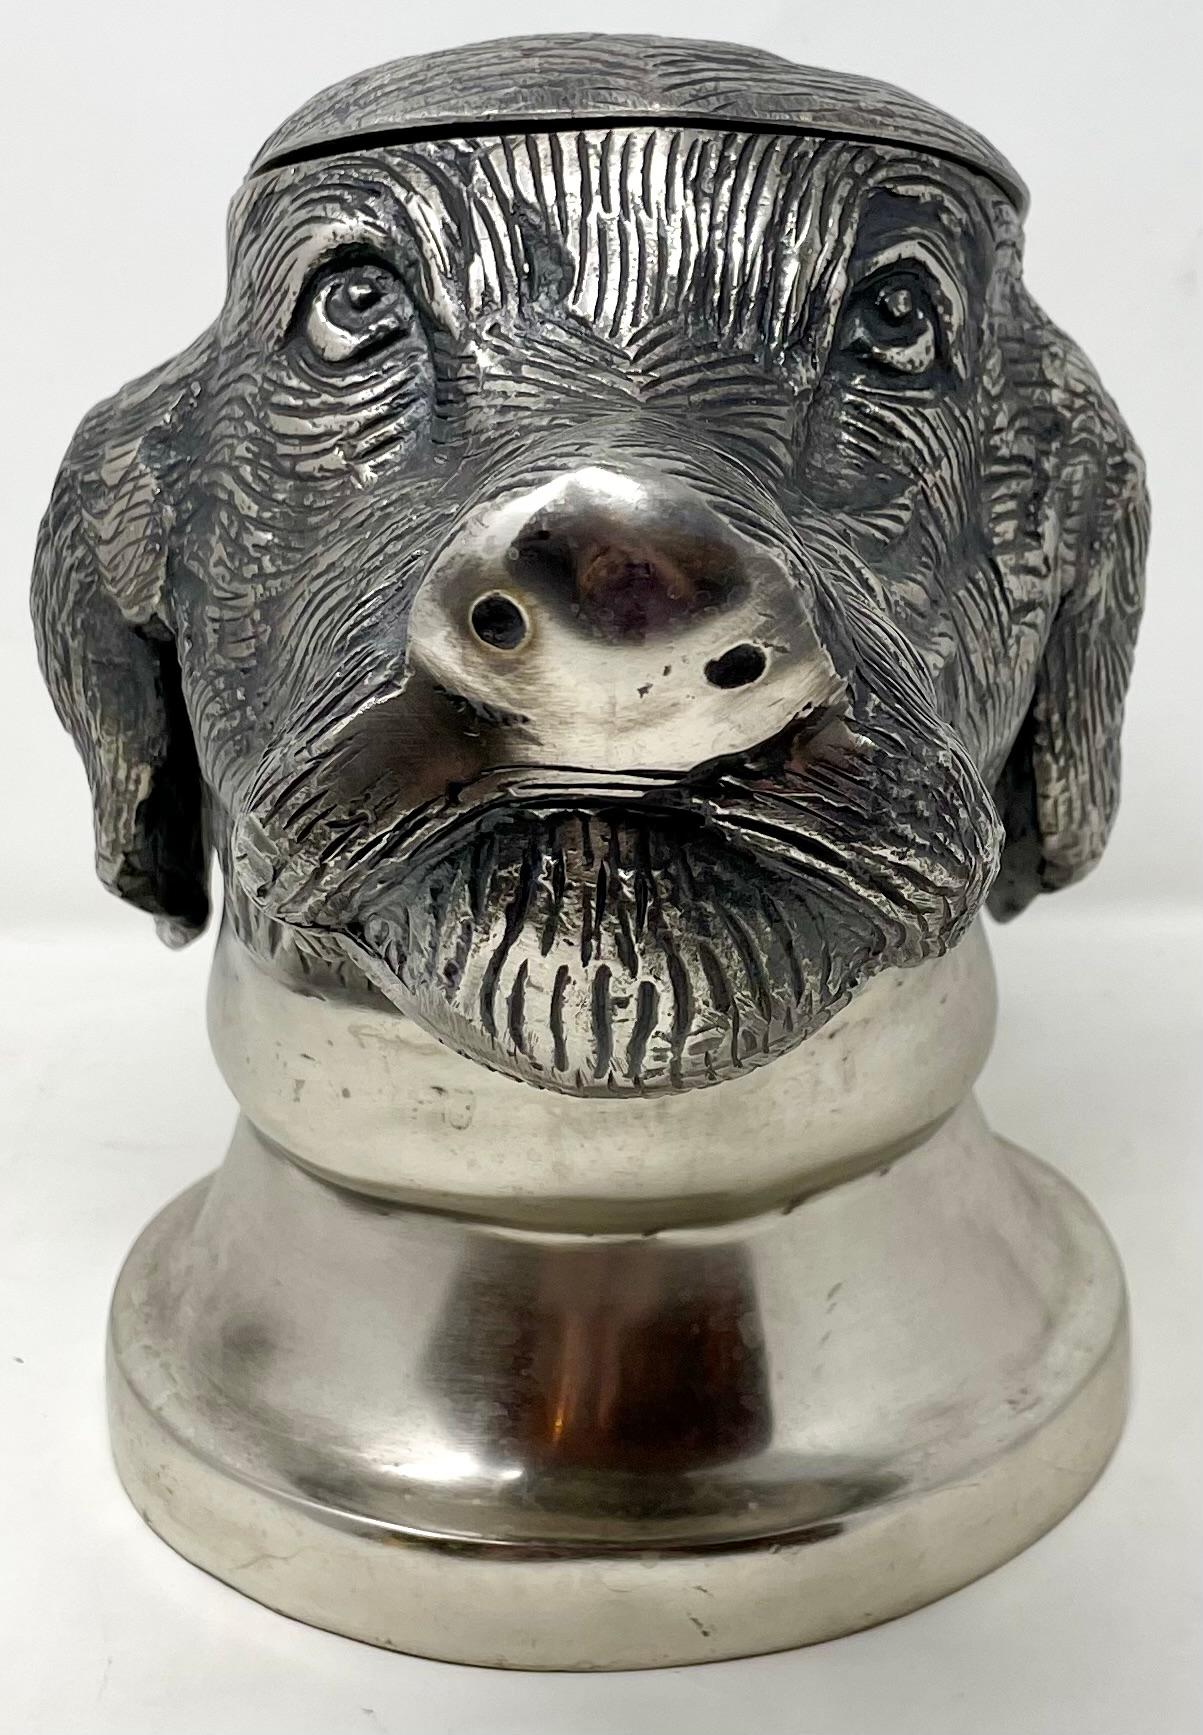 Estate Retro silver-plated dog ice bucket, circa 1950s.
Substantial heft and size.